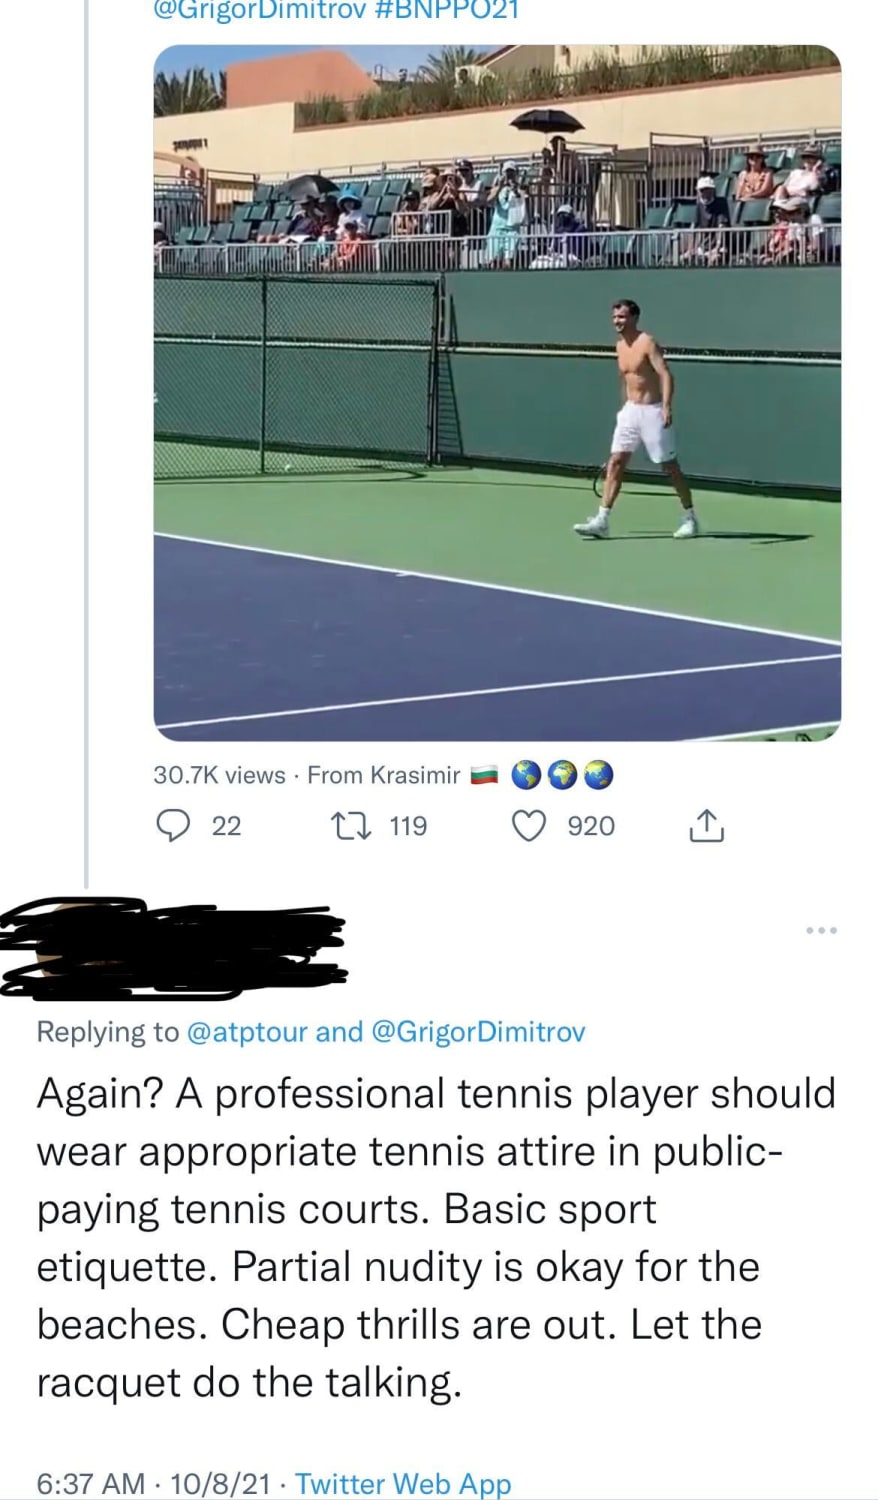 New tennis copypasta of tennis fan on Twitter complaining about Grigor Dimitrov not wearing a shirt during practice.